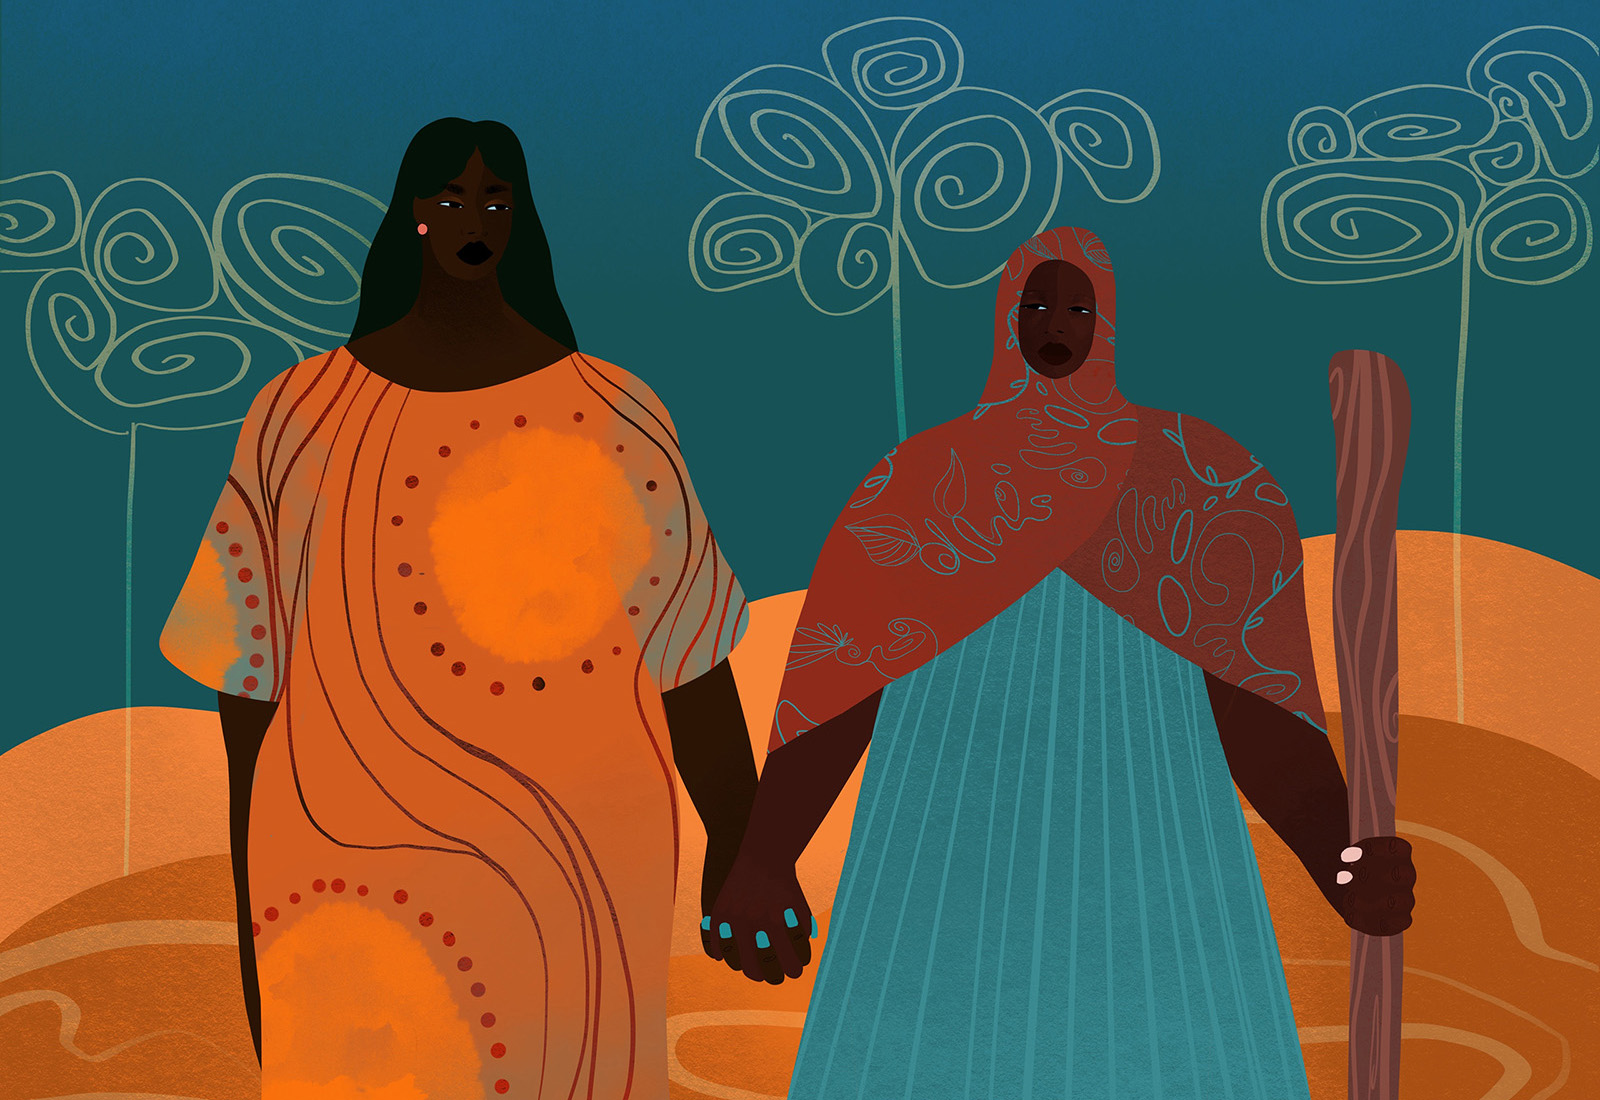 Illustration of two dark skinned Black women holding hands. One is wearing a headscarf and green dress and carrying a staff. The other has long black hair, blue nails and an orange dress. In the background is an abstract landscape of orange hills and trees.